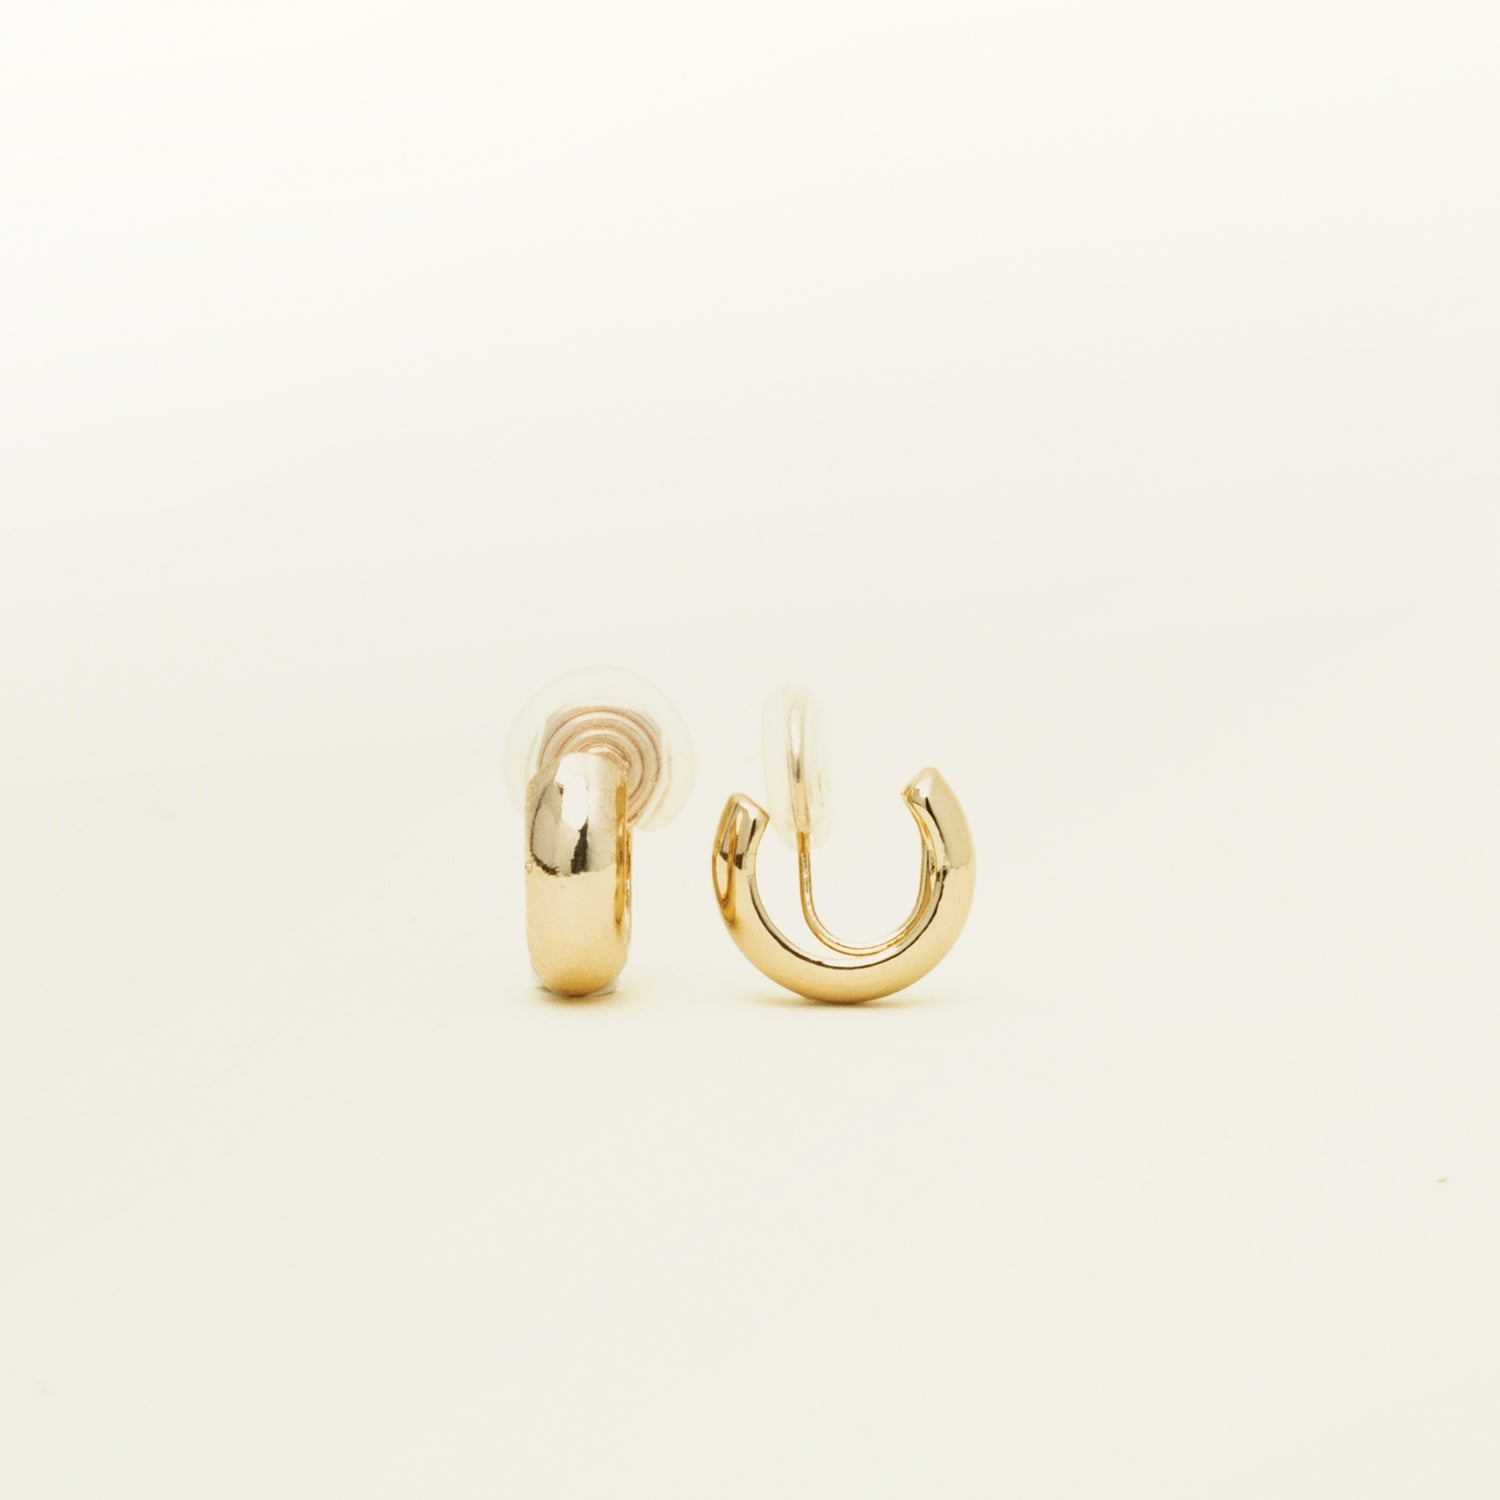 Image of the Small Hoop Clip On Earrings in Gold feature a mosquito coil closure for a secure hold of up to 24 hours. The earrings are designed to fit any ear type, including thick or large, sensitive, small or thin, and stretched or healing ears. They possess a medium secure hold and can be adjusted to fit the wearer's ear size, simply by gently squeezing the inner padding forward. Crafted from gold tone plated copper alloy, each package contains one pair.